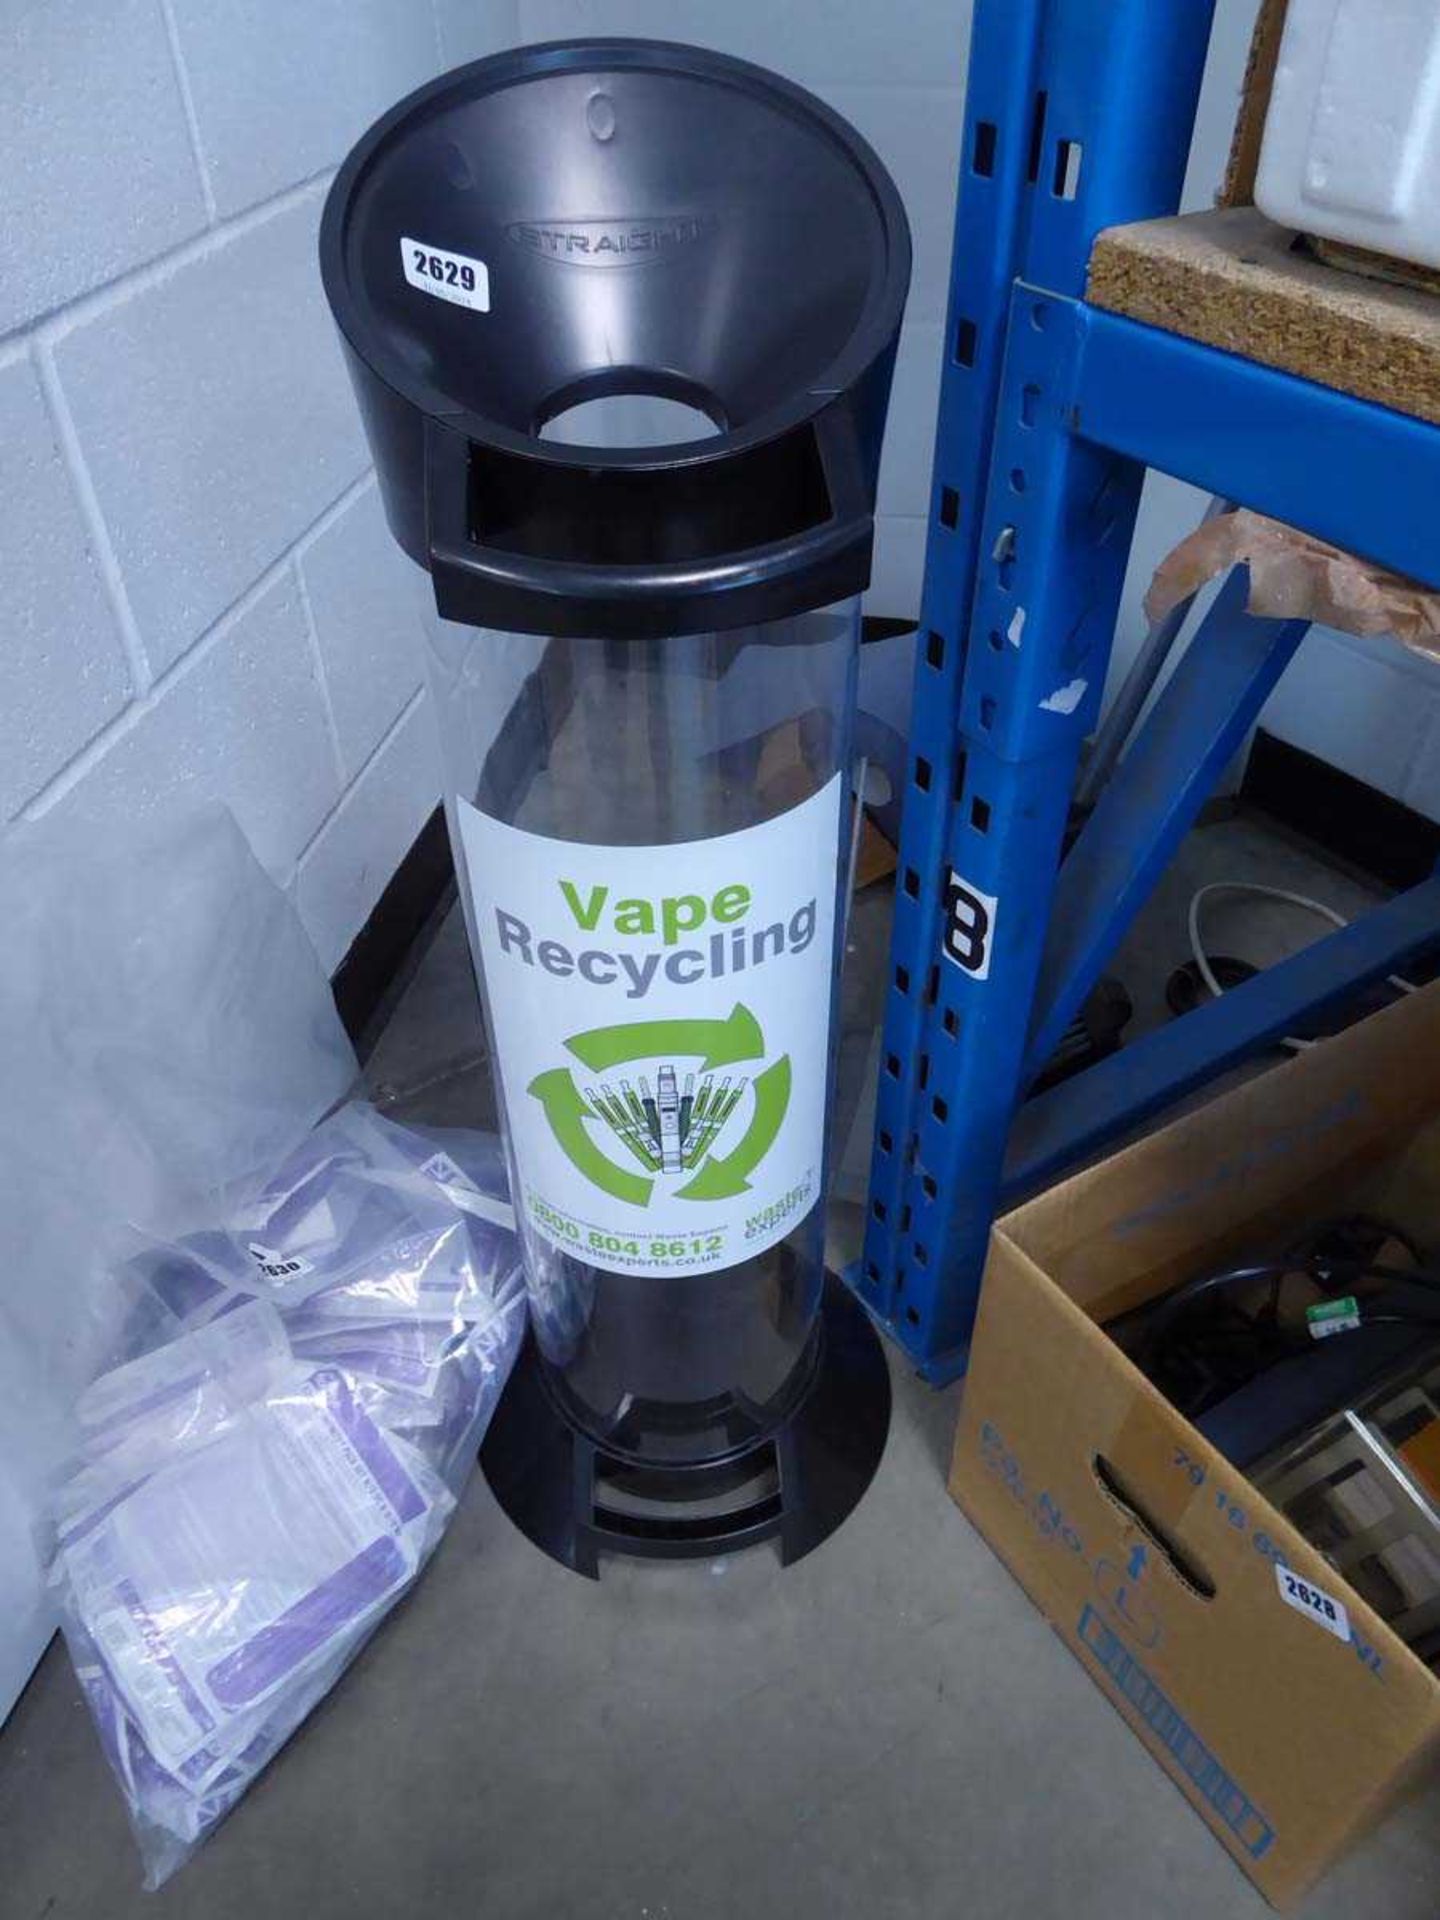 Vape recycling container